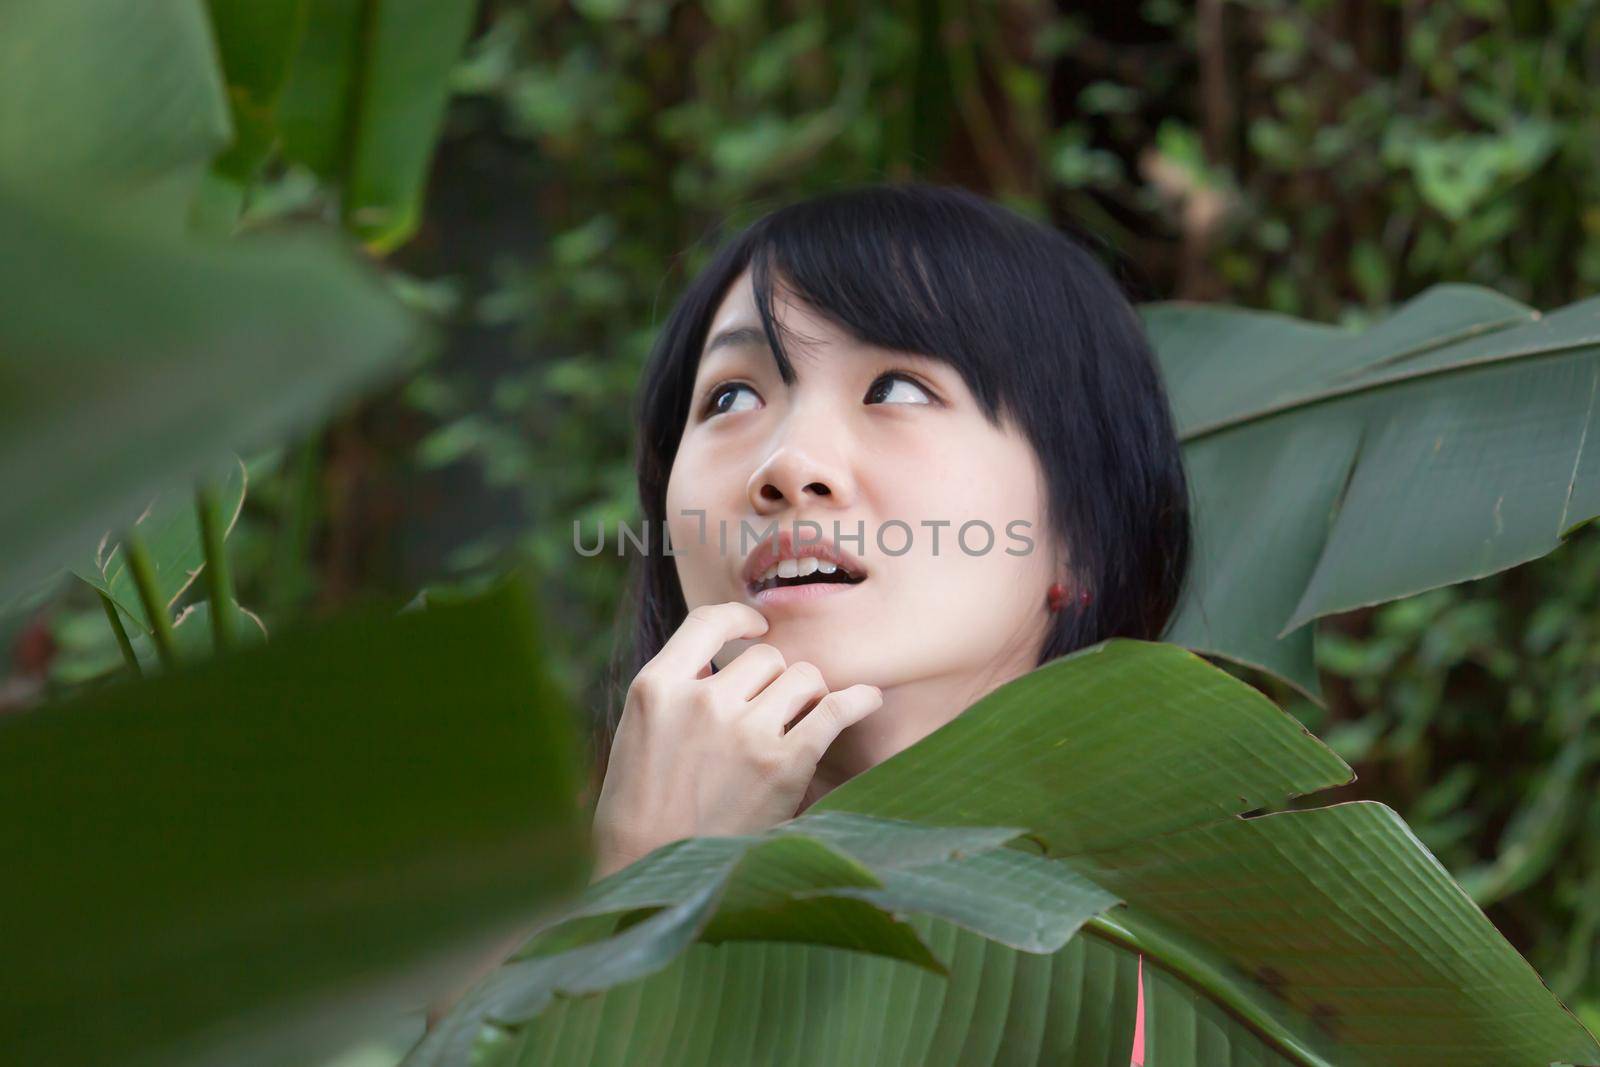 Beautiful Asian girl by foliage with hand on chin by imagesbykenny